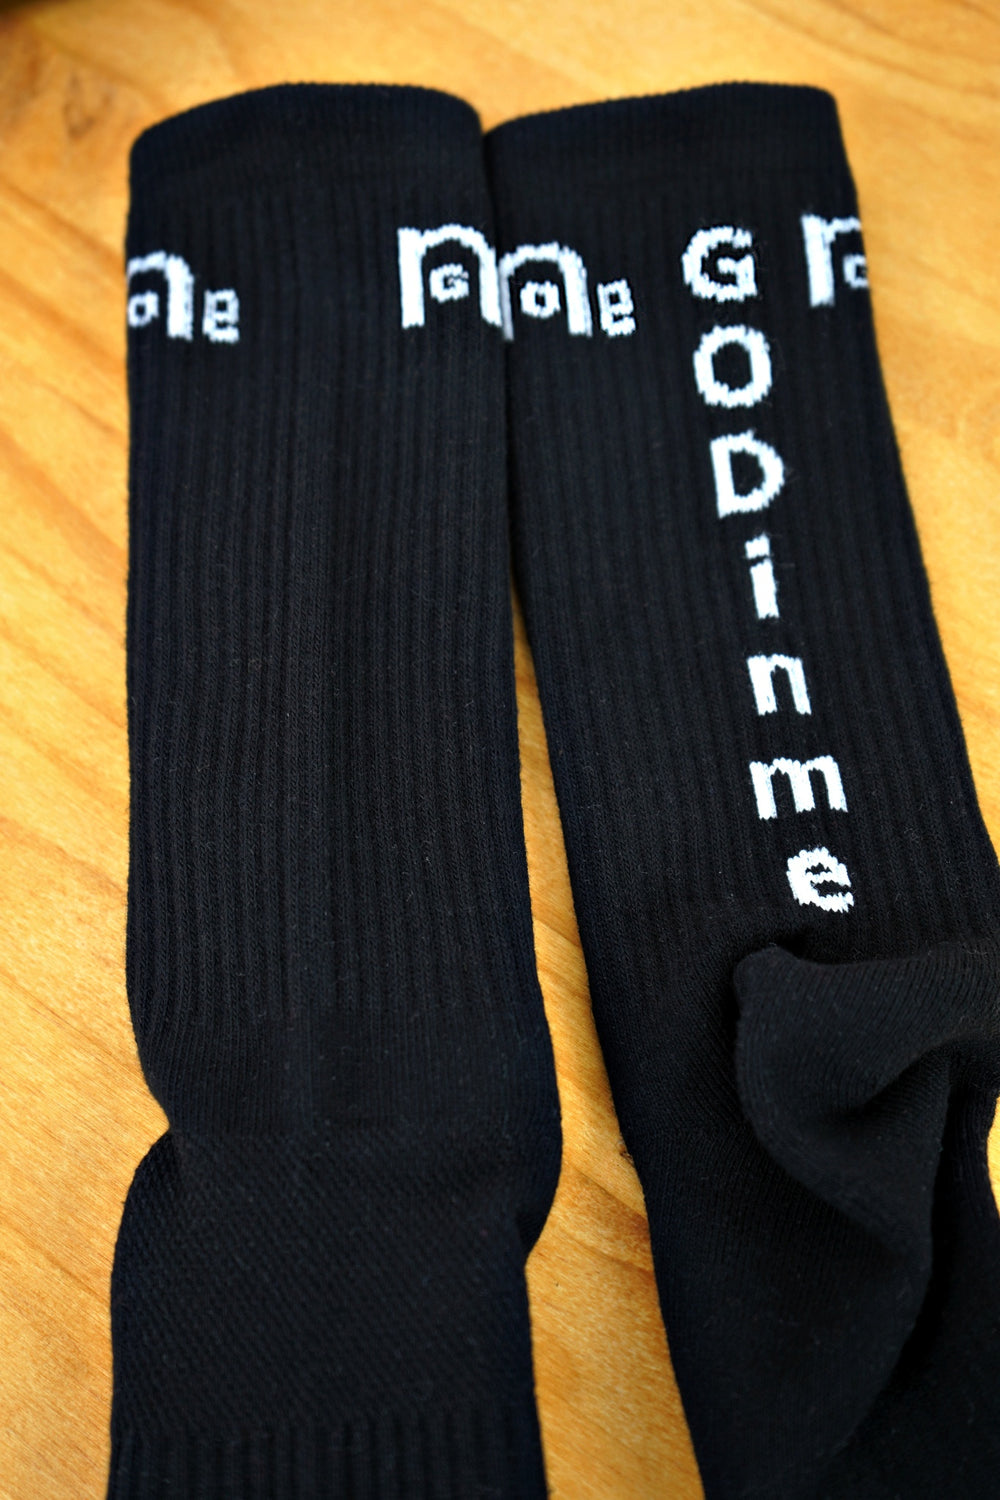 High quality Women's Black Athletic Socks are comfortable yet durable; featuring the empowering GODinme logo on each side, and GODinme name at toes and back achilles area to give you the confidence and motivation to reach your fitness goals.